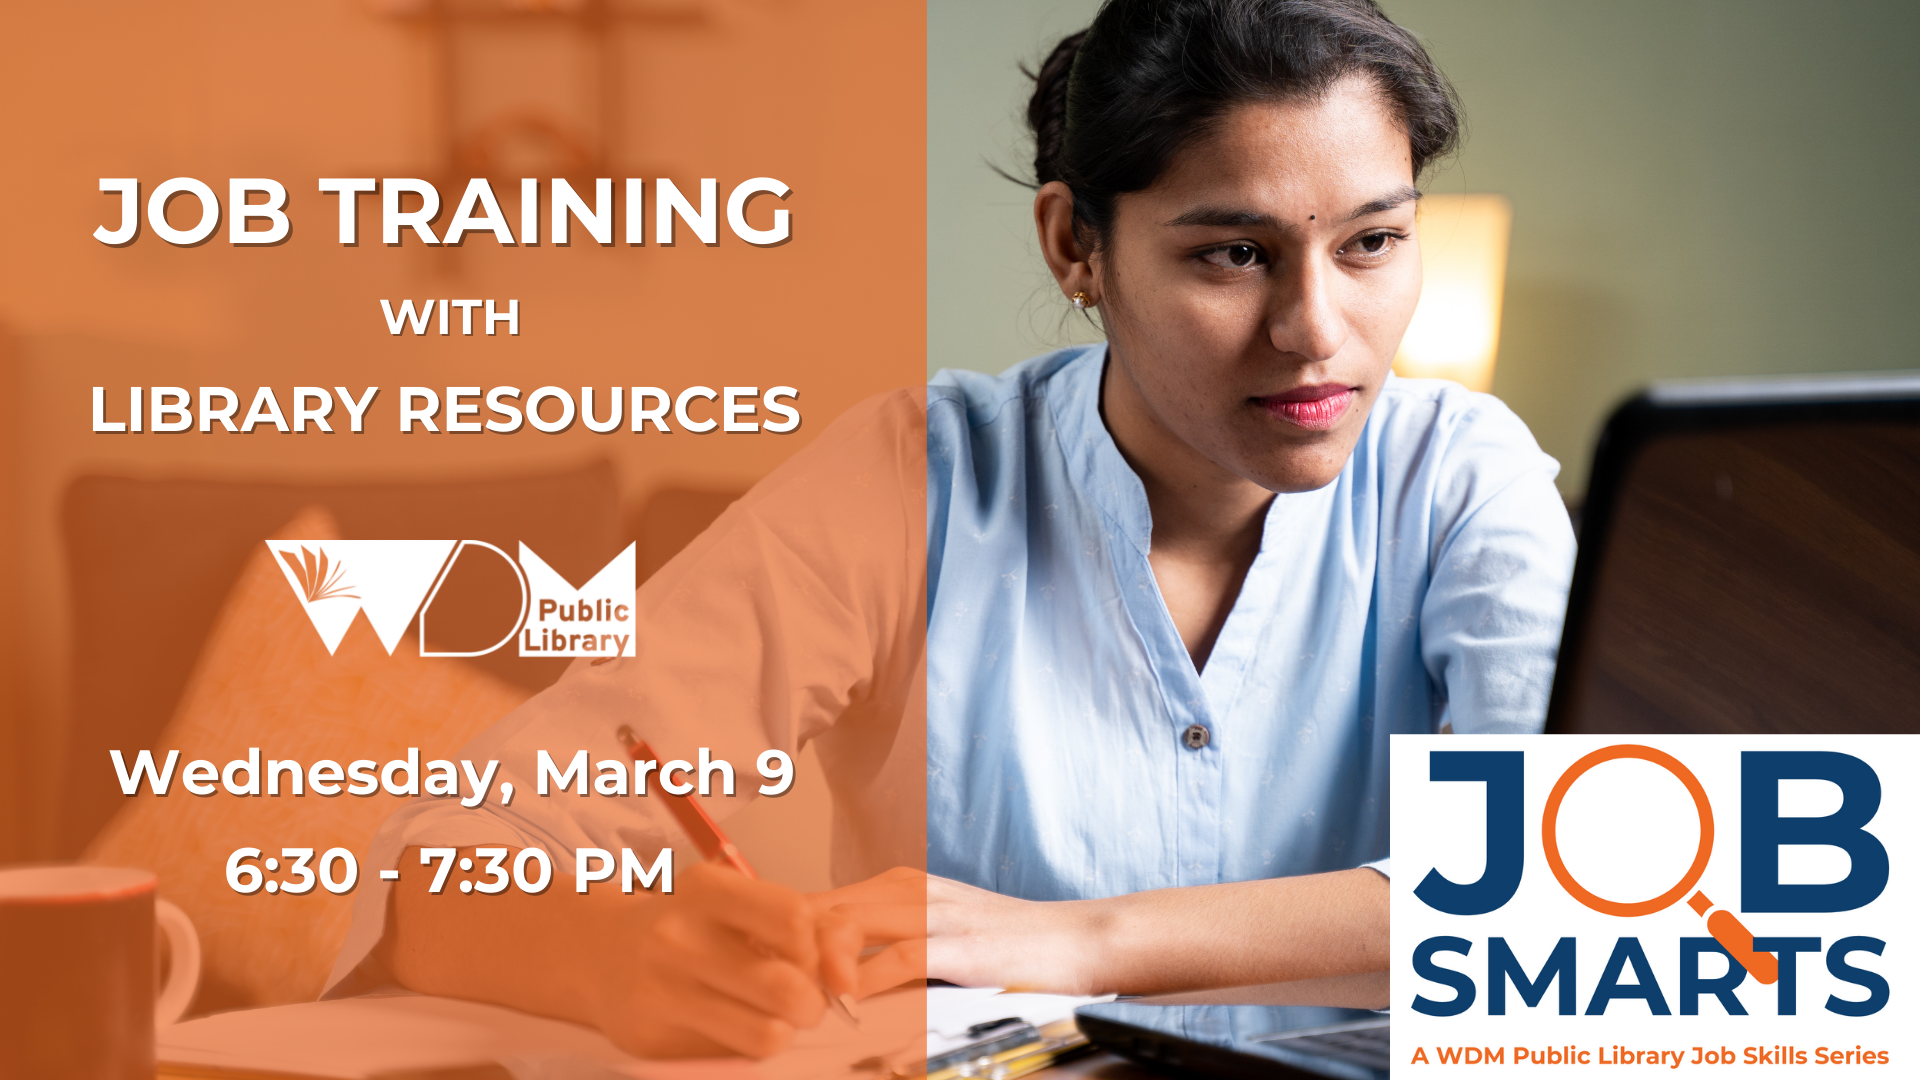 Image for "Job Training with Library Resources"